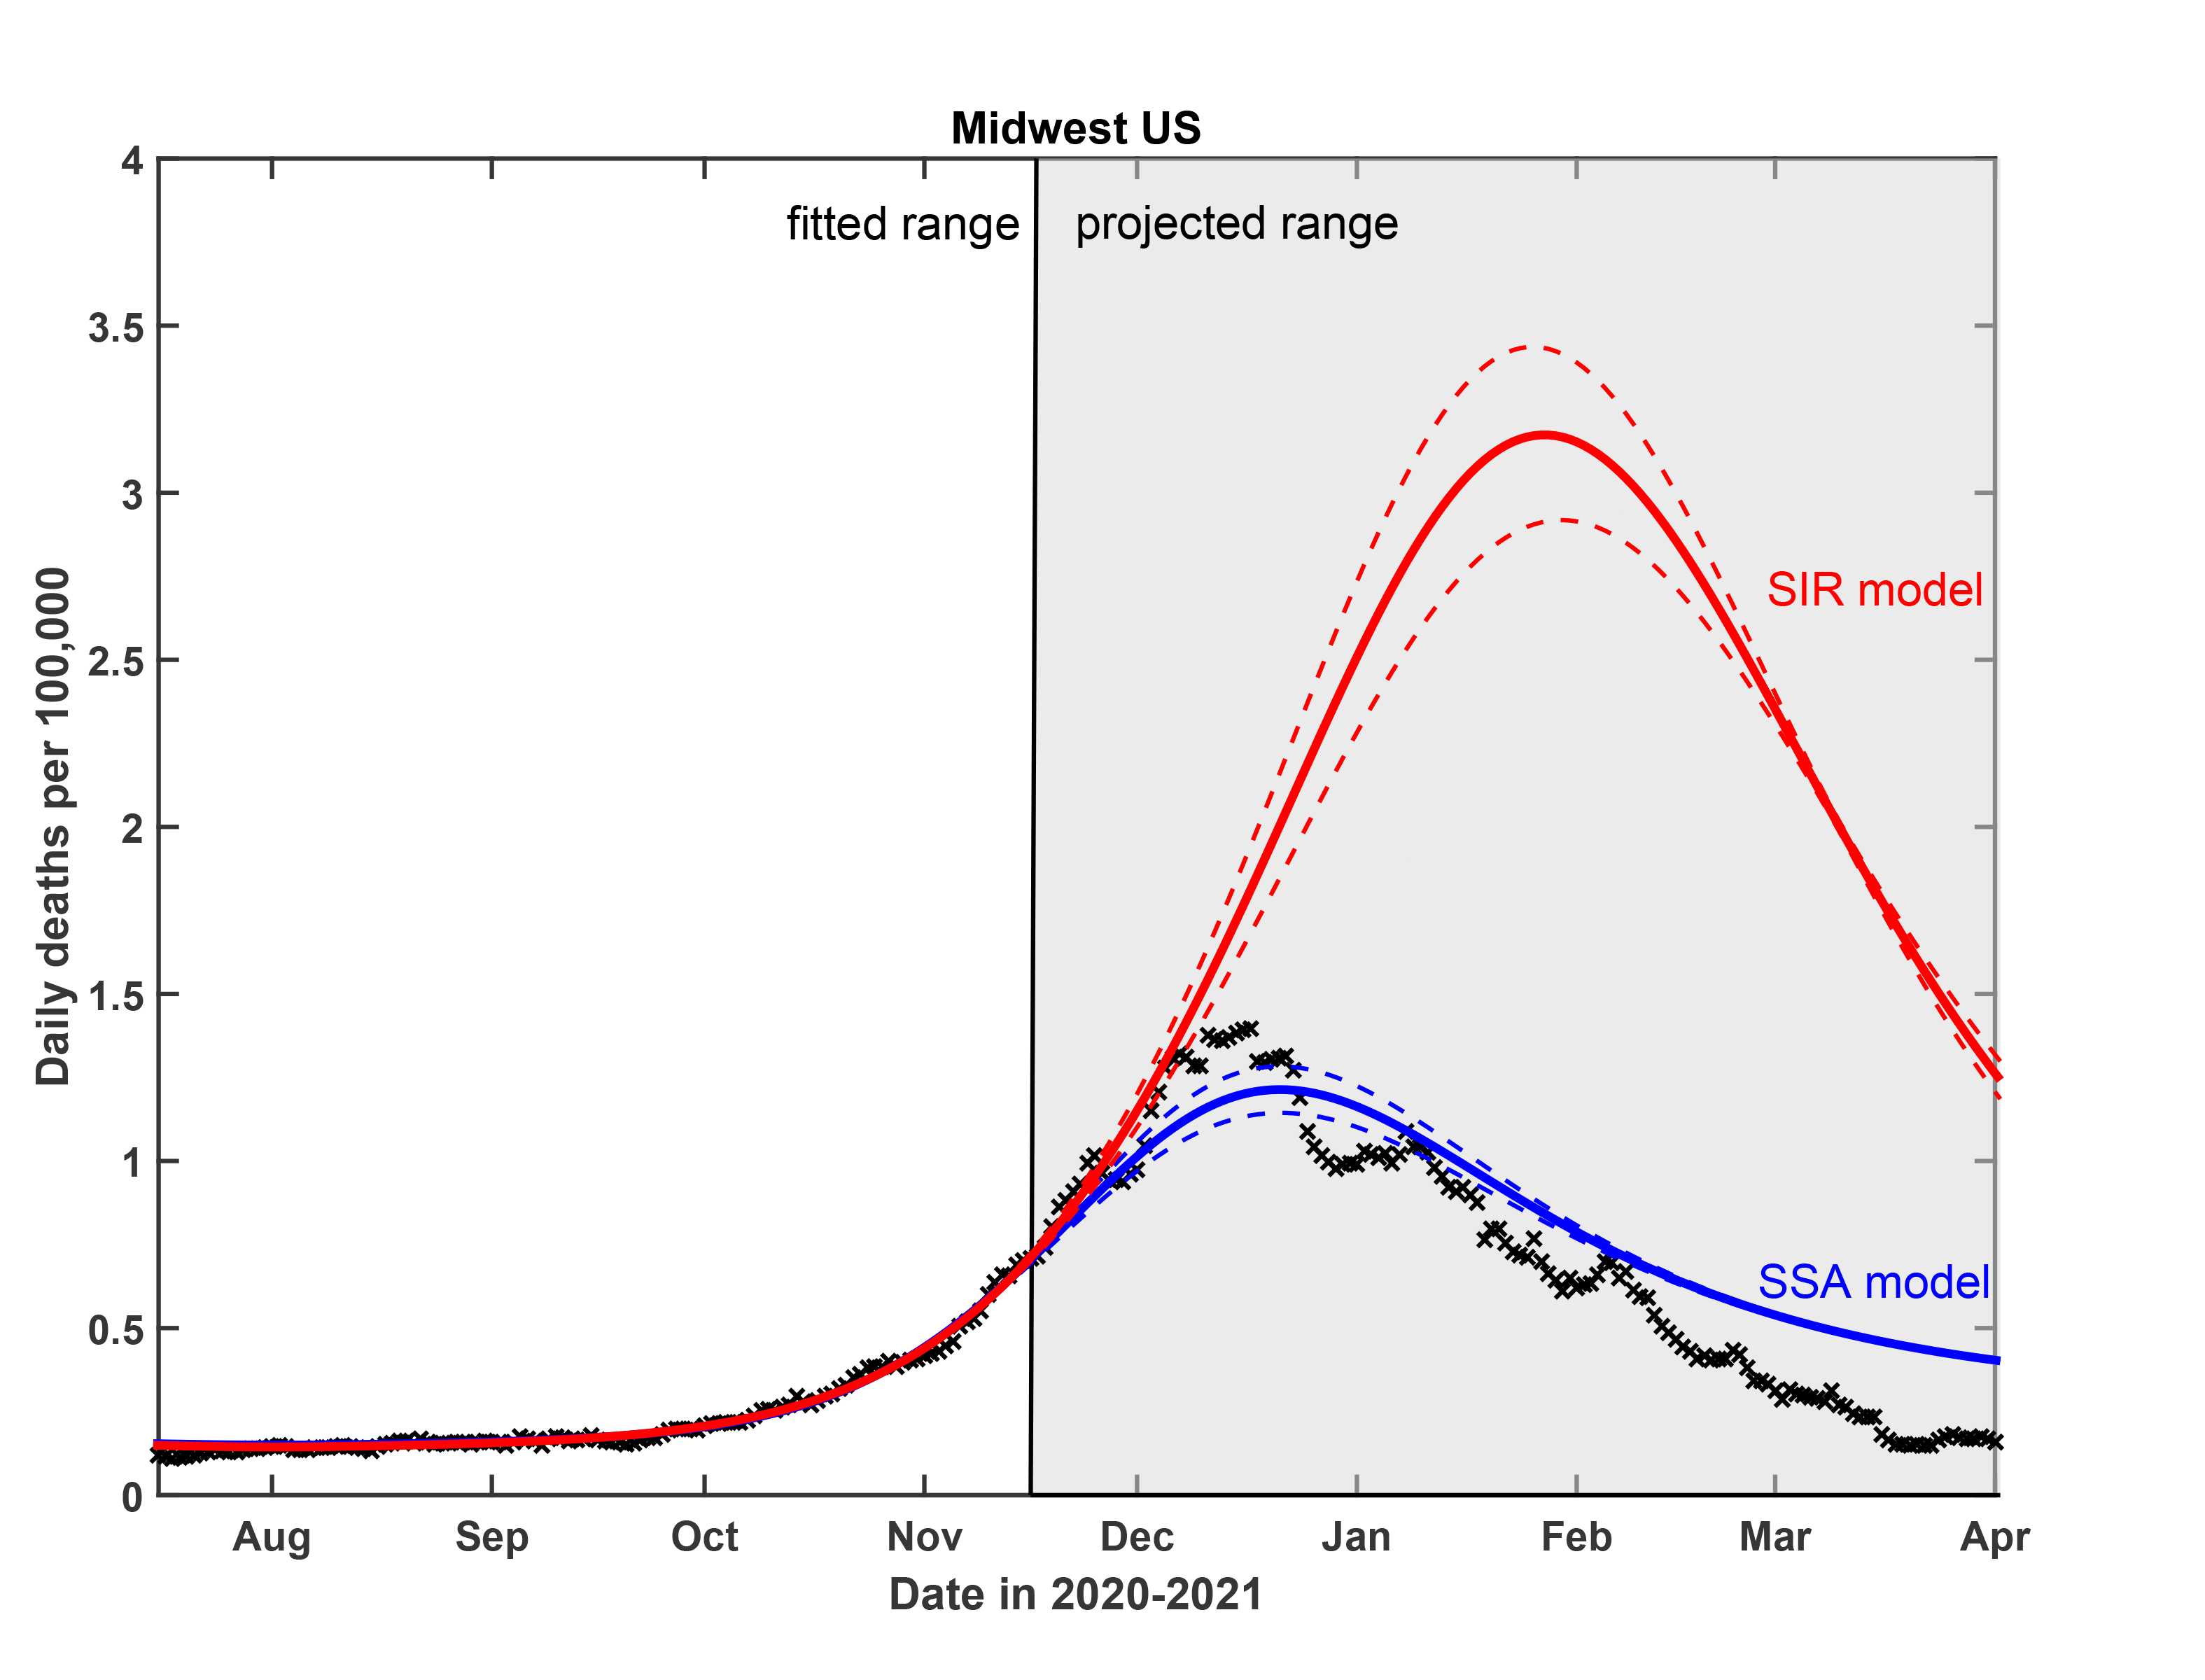 Figure 8 in the published paper depicts a test of the predictive power of the Stochastic Social Activity (SSA) model developed in this work. Daily deaths data in the Midwest region of the USA have been fitted up to Nov 17, 2020. The epidemic dynamic beyond that date has been projected by our model (blue). One observes a good agreement between this prediction and the reported data (crosses). In contrast, the classical SIR model (red) substantially overestimates the height of the peak, and projects it at a much later date than had been observed. Solid lines represent the best-fit behavior for each of the models, while dotted lines indicate the corresponding 95 percent confidence intervals. Credit: A. V. Tkachenko, et al., eLife